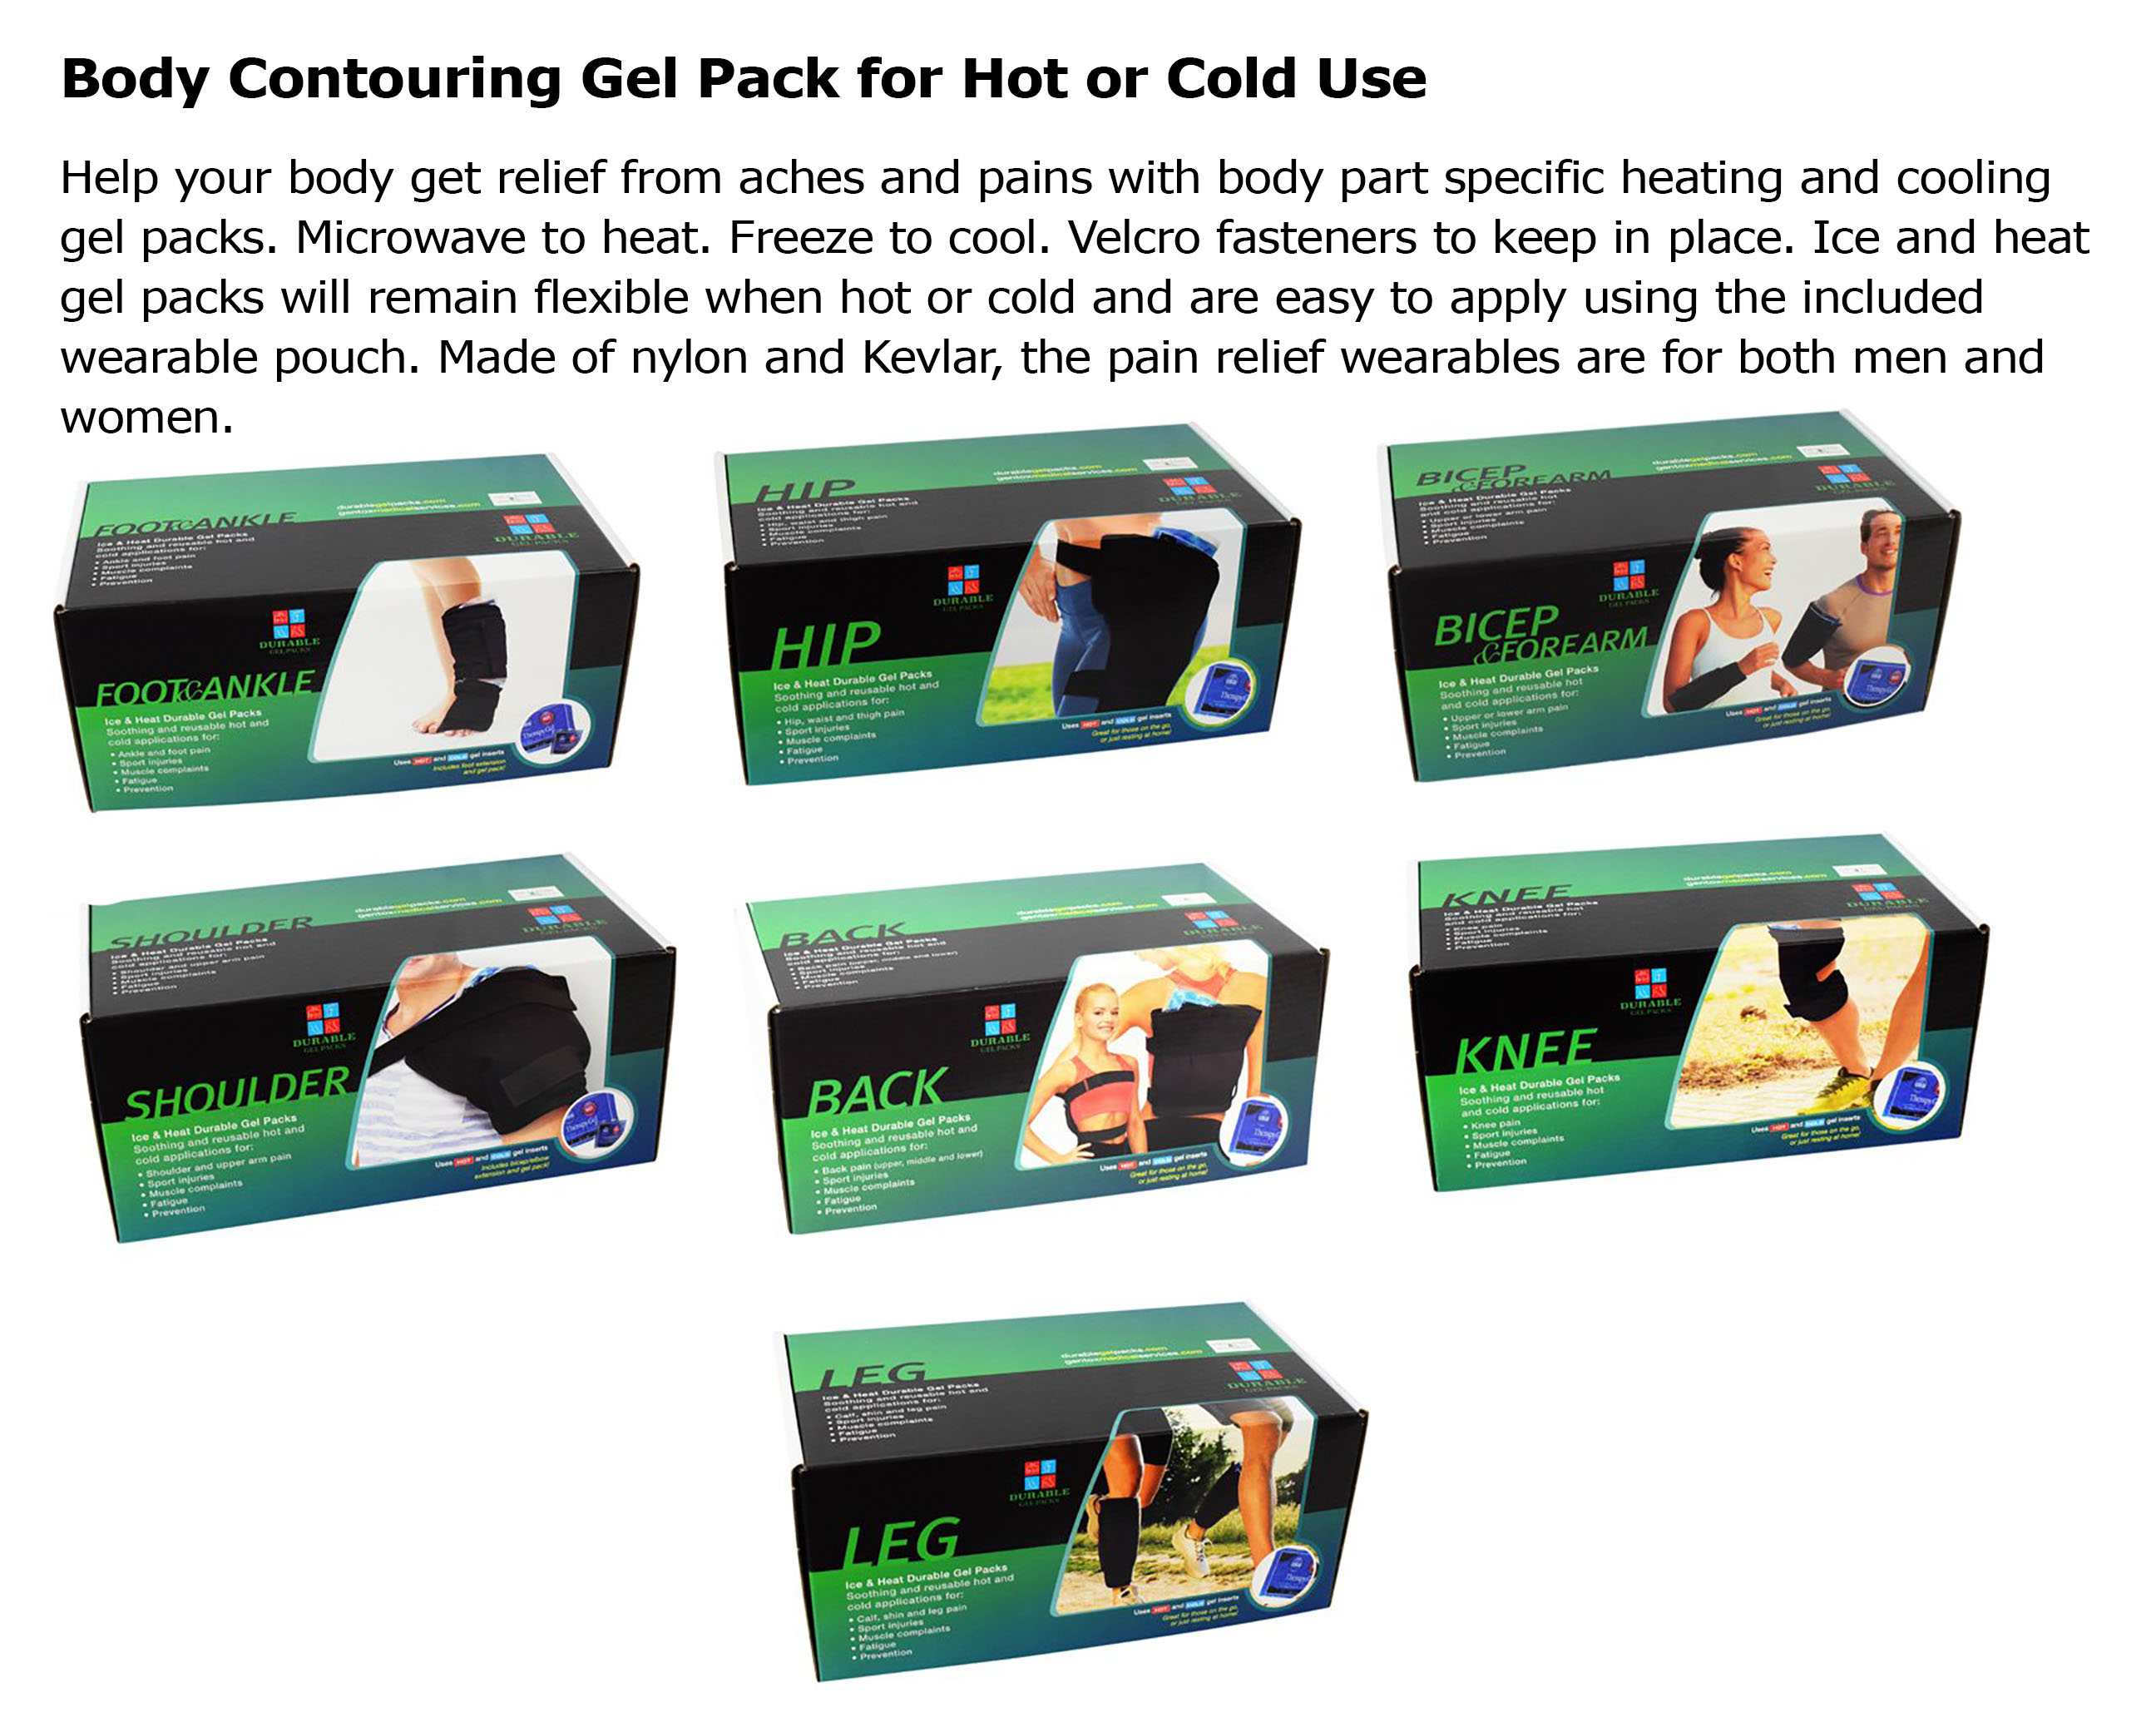 Body contouring gel pack